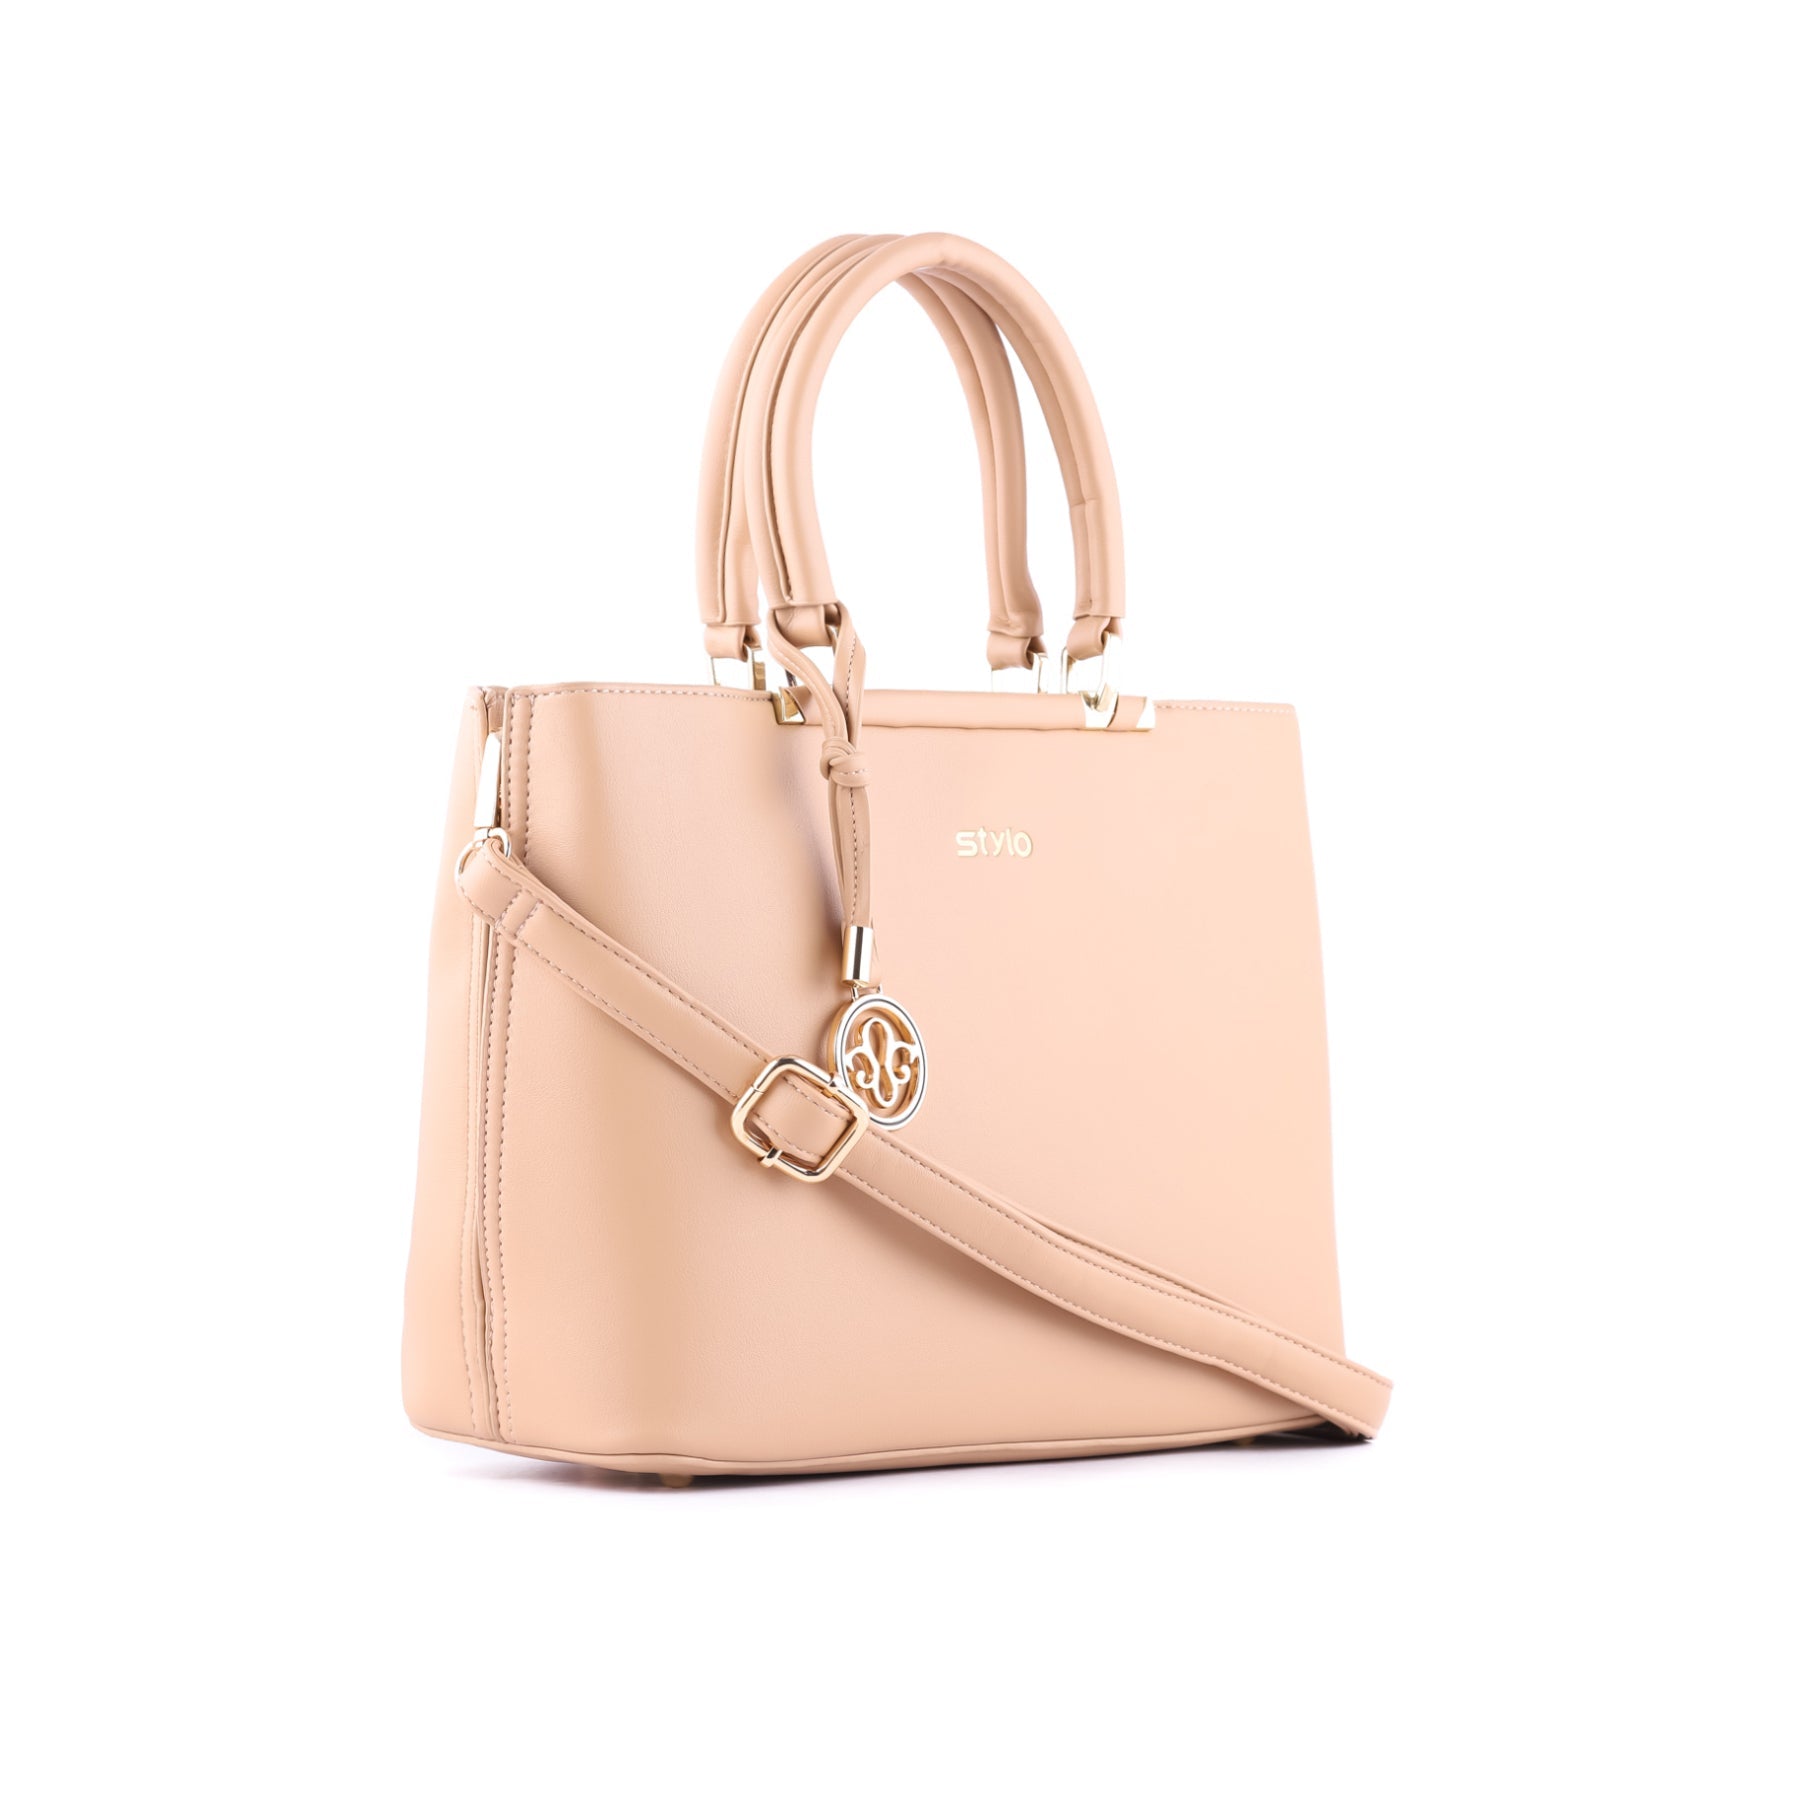 Fawn Color Formal Hand Bag P35003